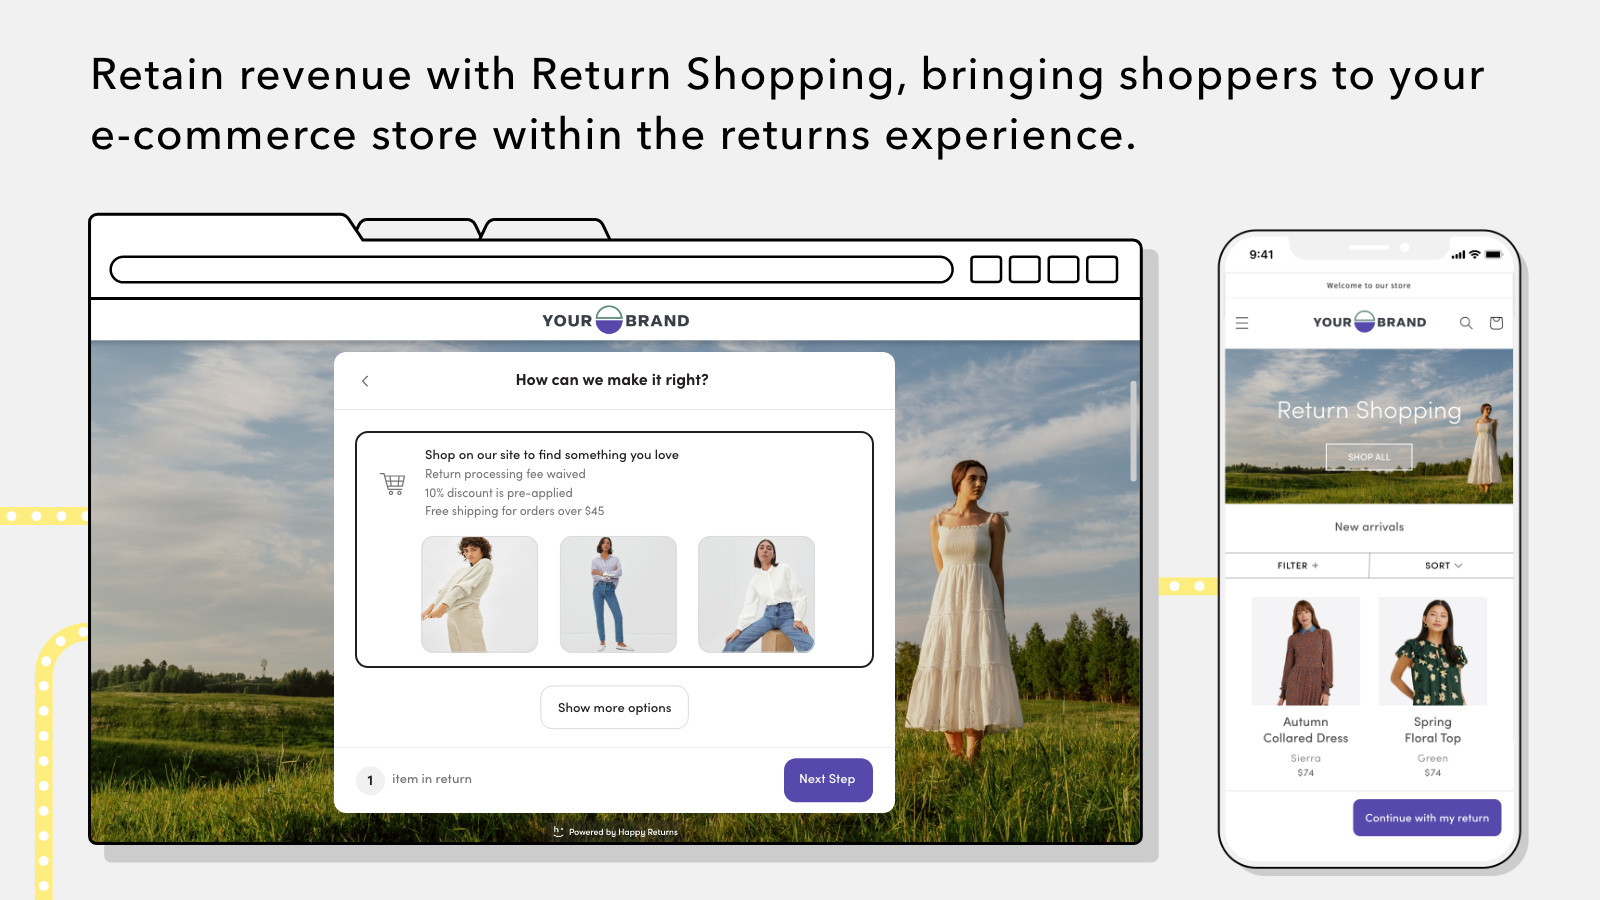 incentivize shoppers to repurchase with Return Shopping